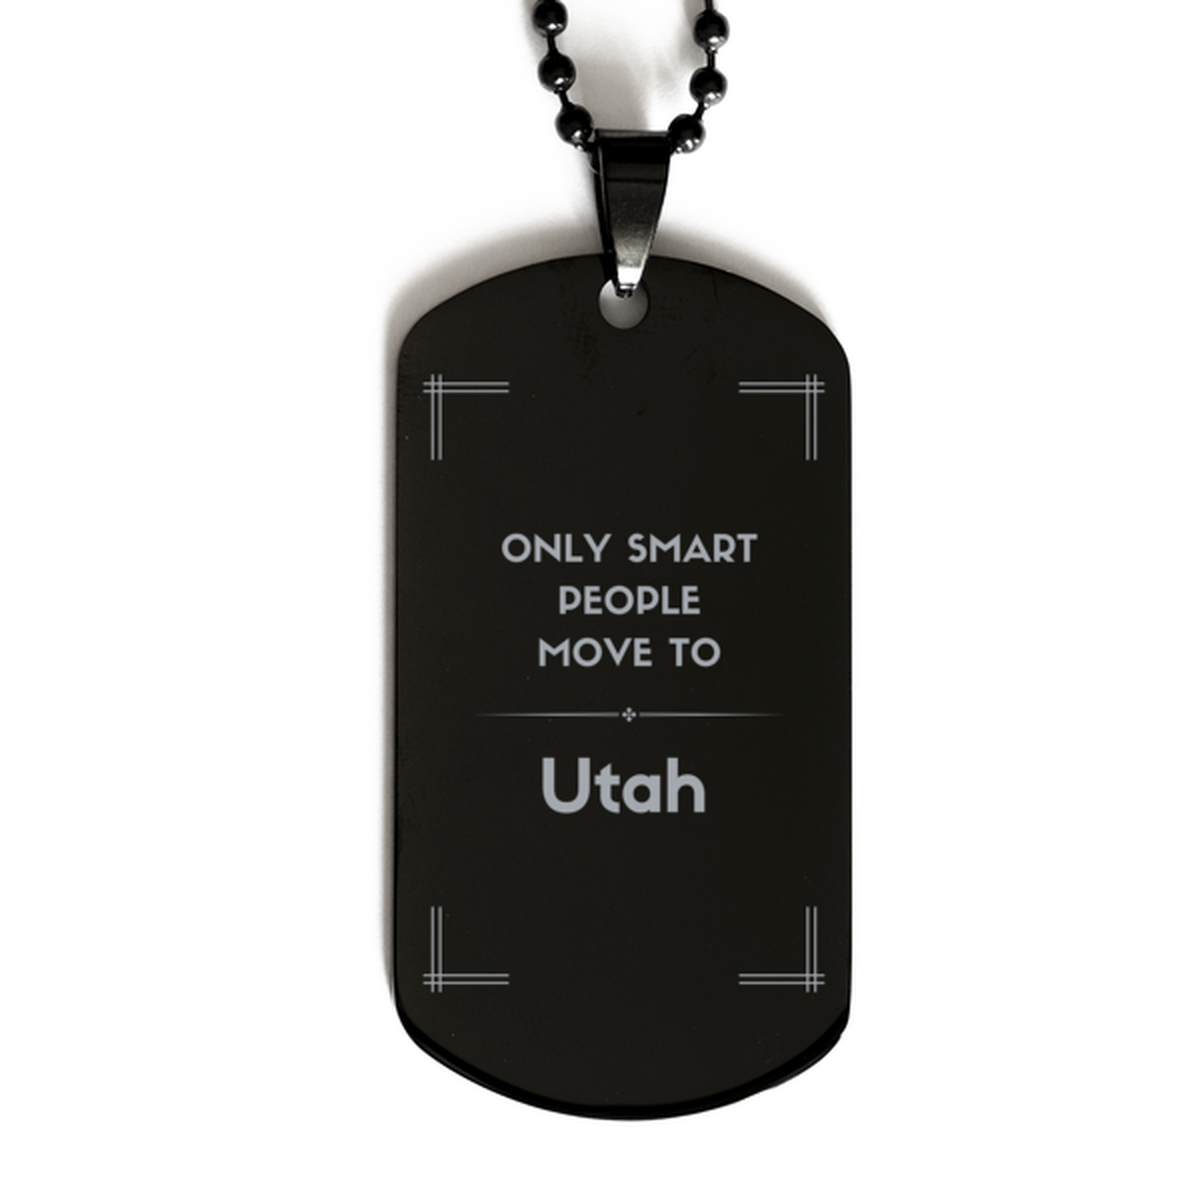 Only smart people move to Utah Black Dog Tag, Gag Gifts For Utah, Move to Utah Gifts for Friends Coworker Funny Saying Quote